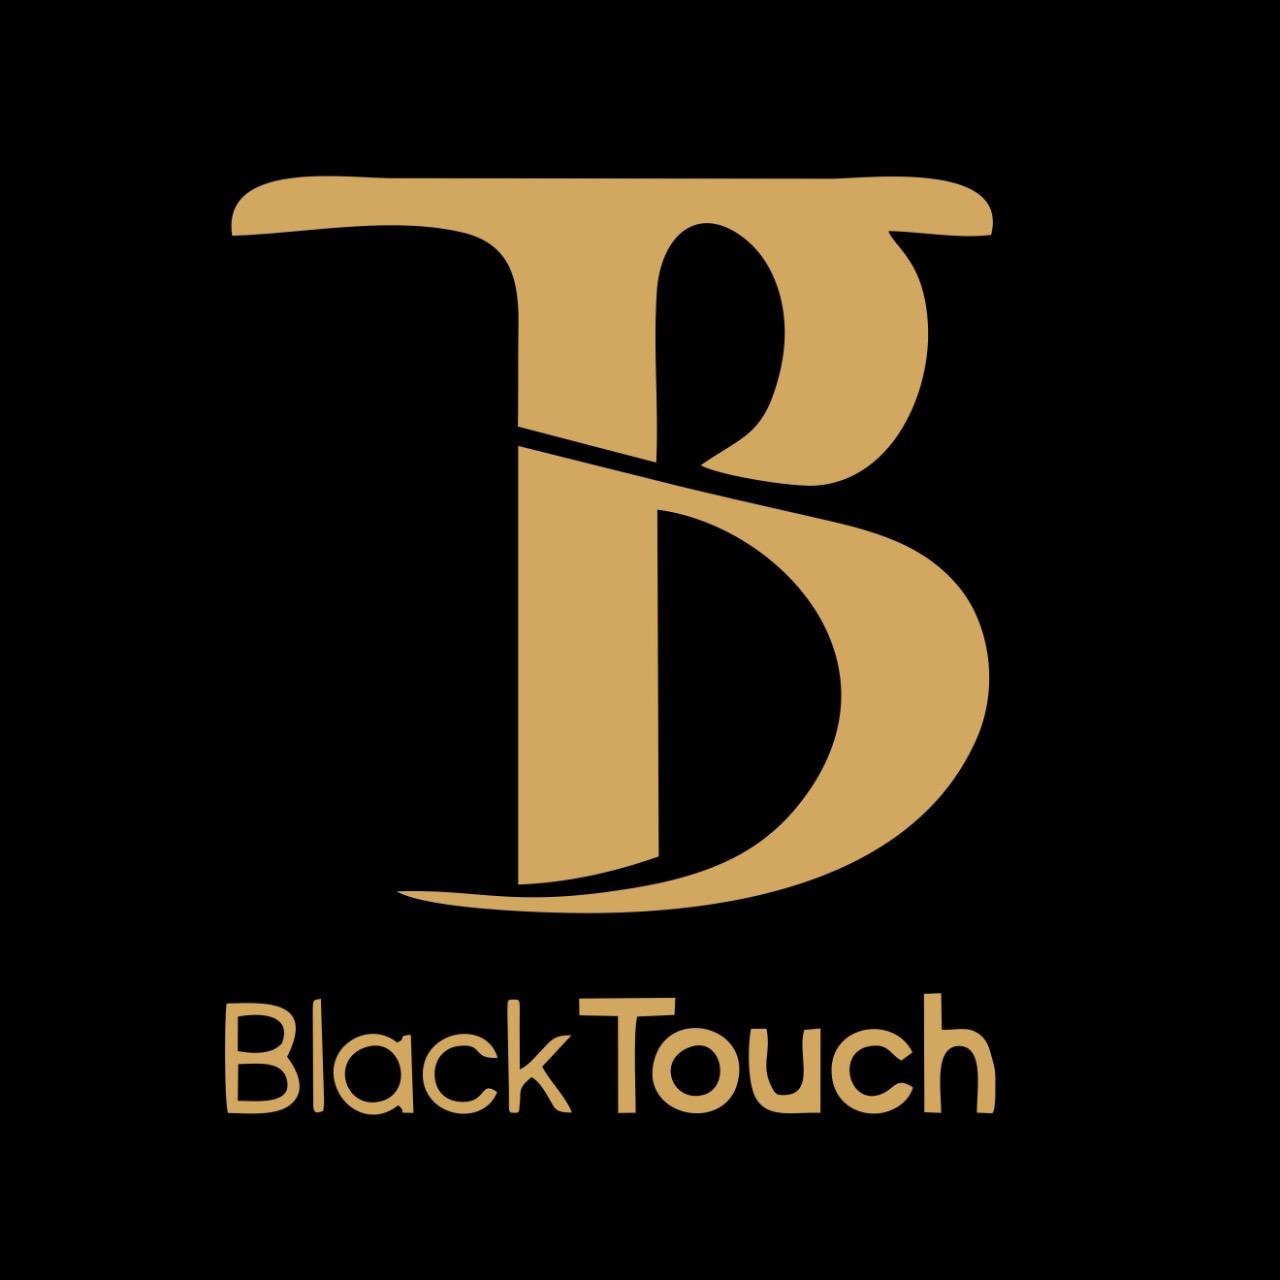 BlackTouch